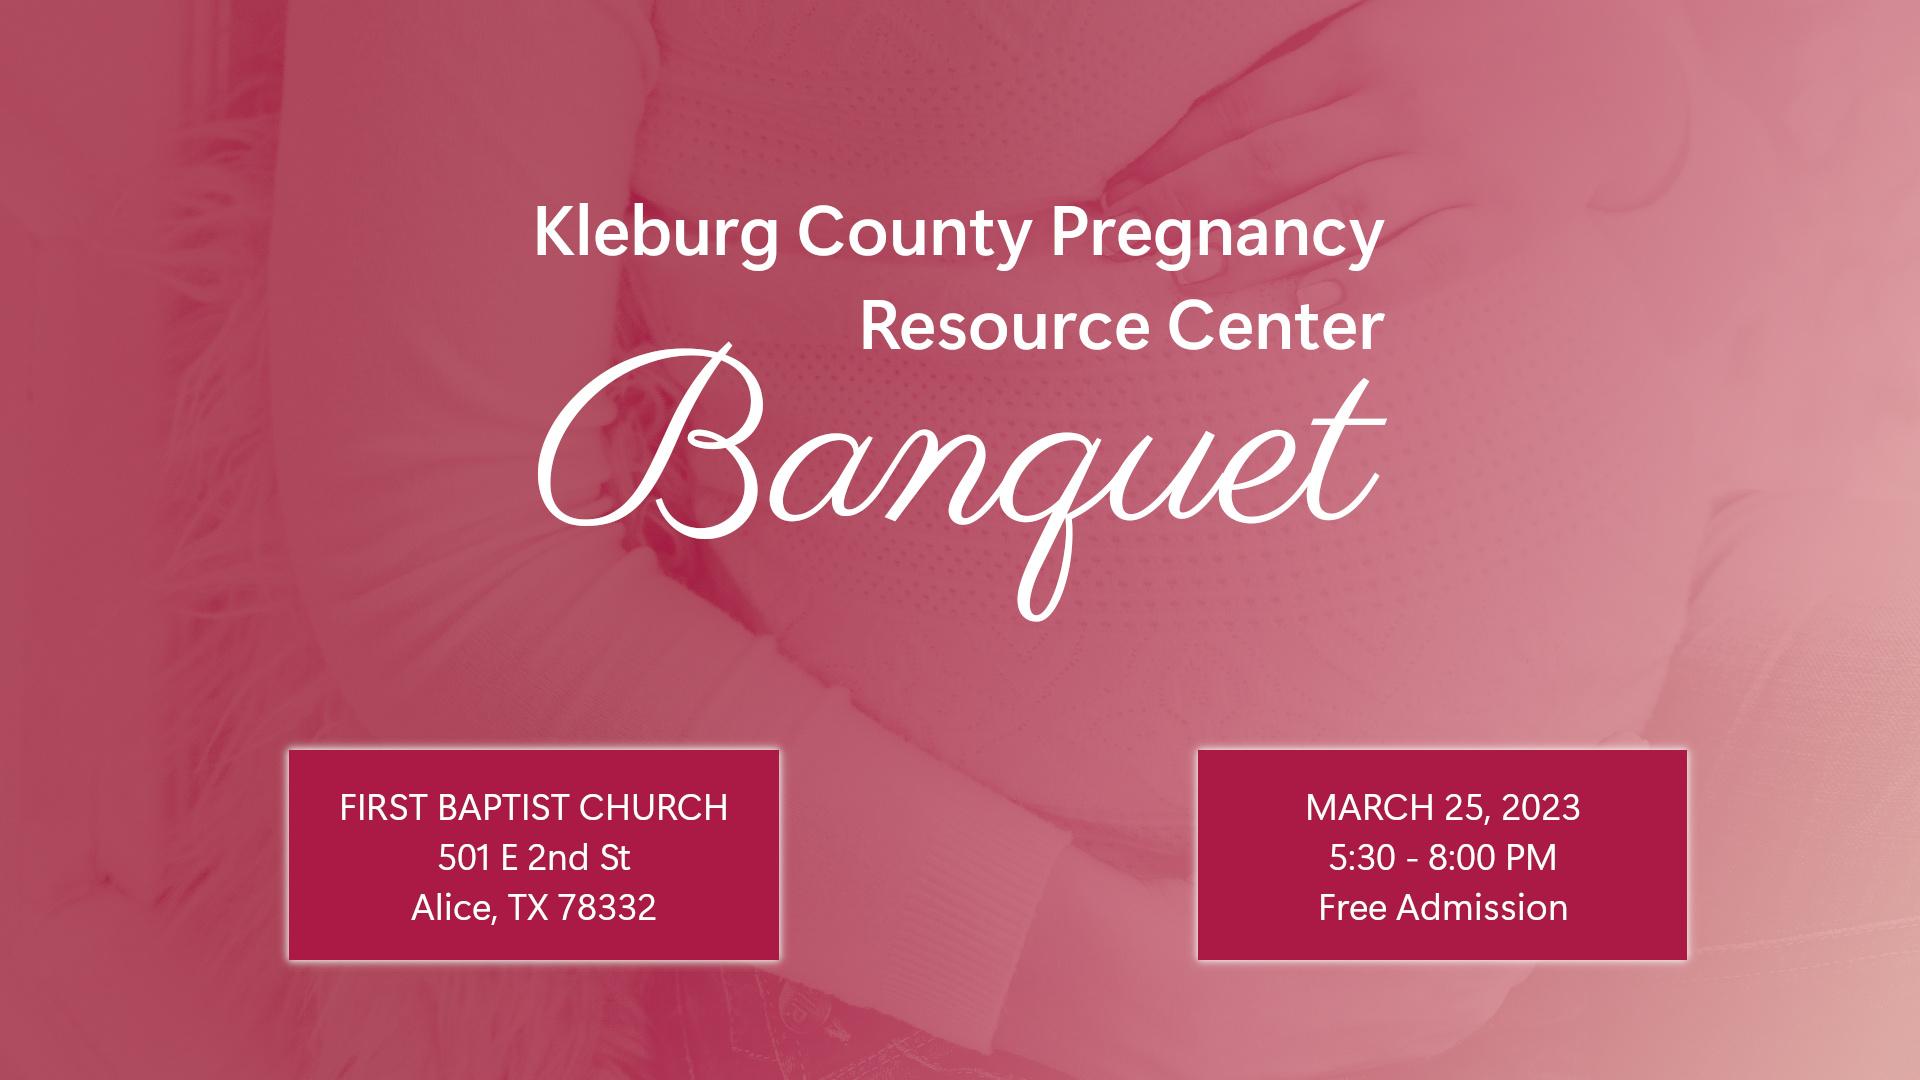 Kleburg County Pregnancy Resource Center Banquet March 25, 2023 at First Baptist in Alice, Texas